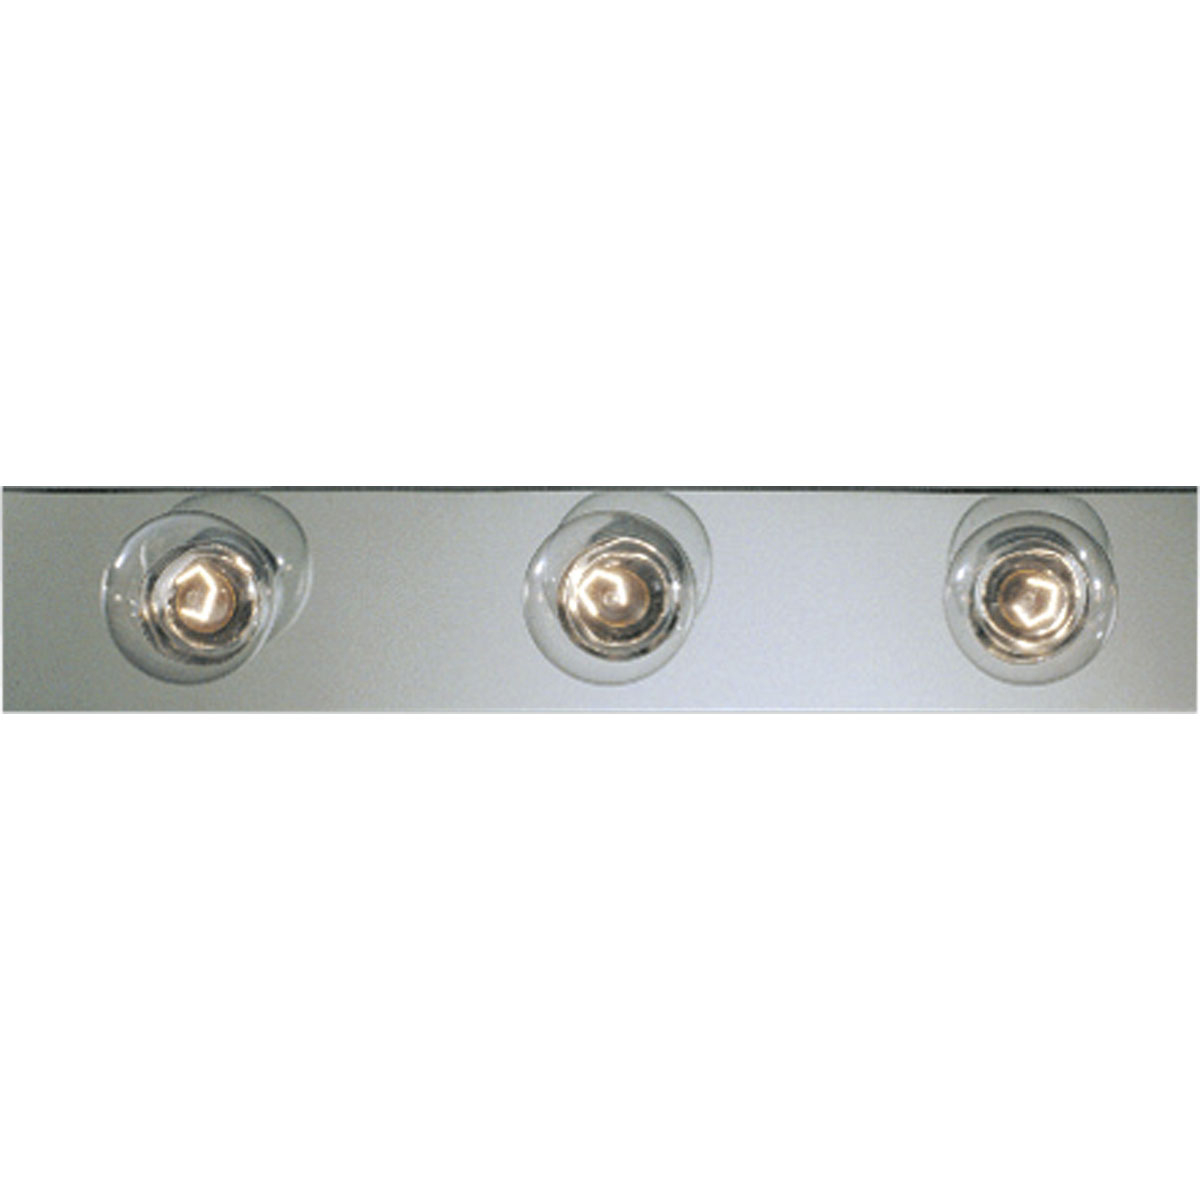 Basic Broadway Lighting strips use fewer lamps to lower the overall wattage per strip. This three-light bath strip with sockets on 7-1/2 inch centers gives an even spread of illumination. UL listed for ceiling mounting with 25w maximum lamps. Complete with a brilliant metallic finish.